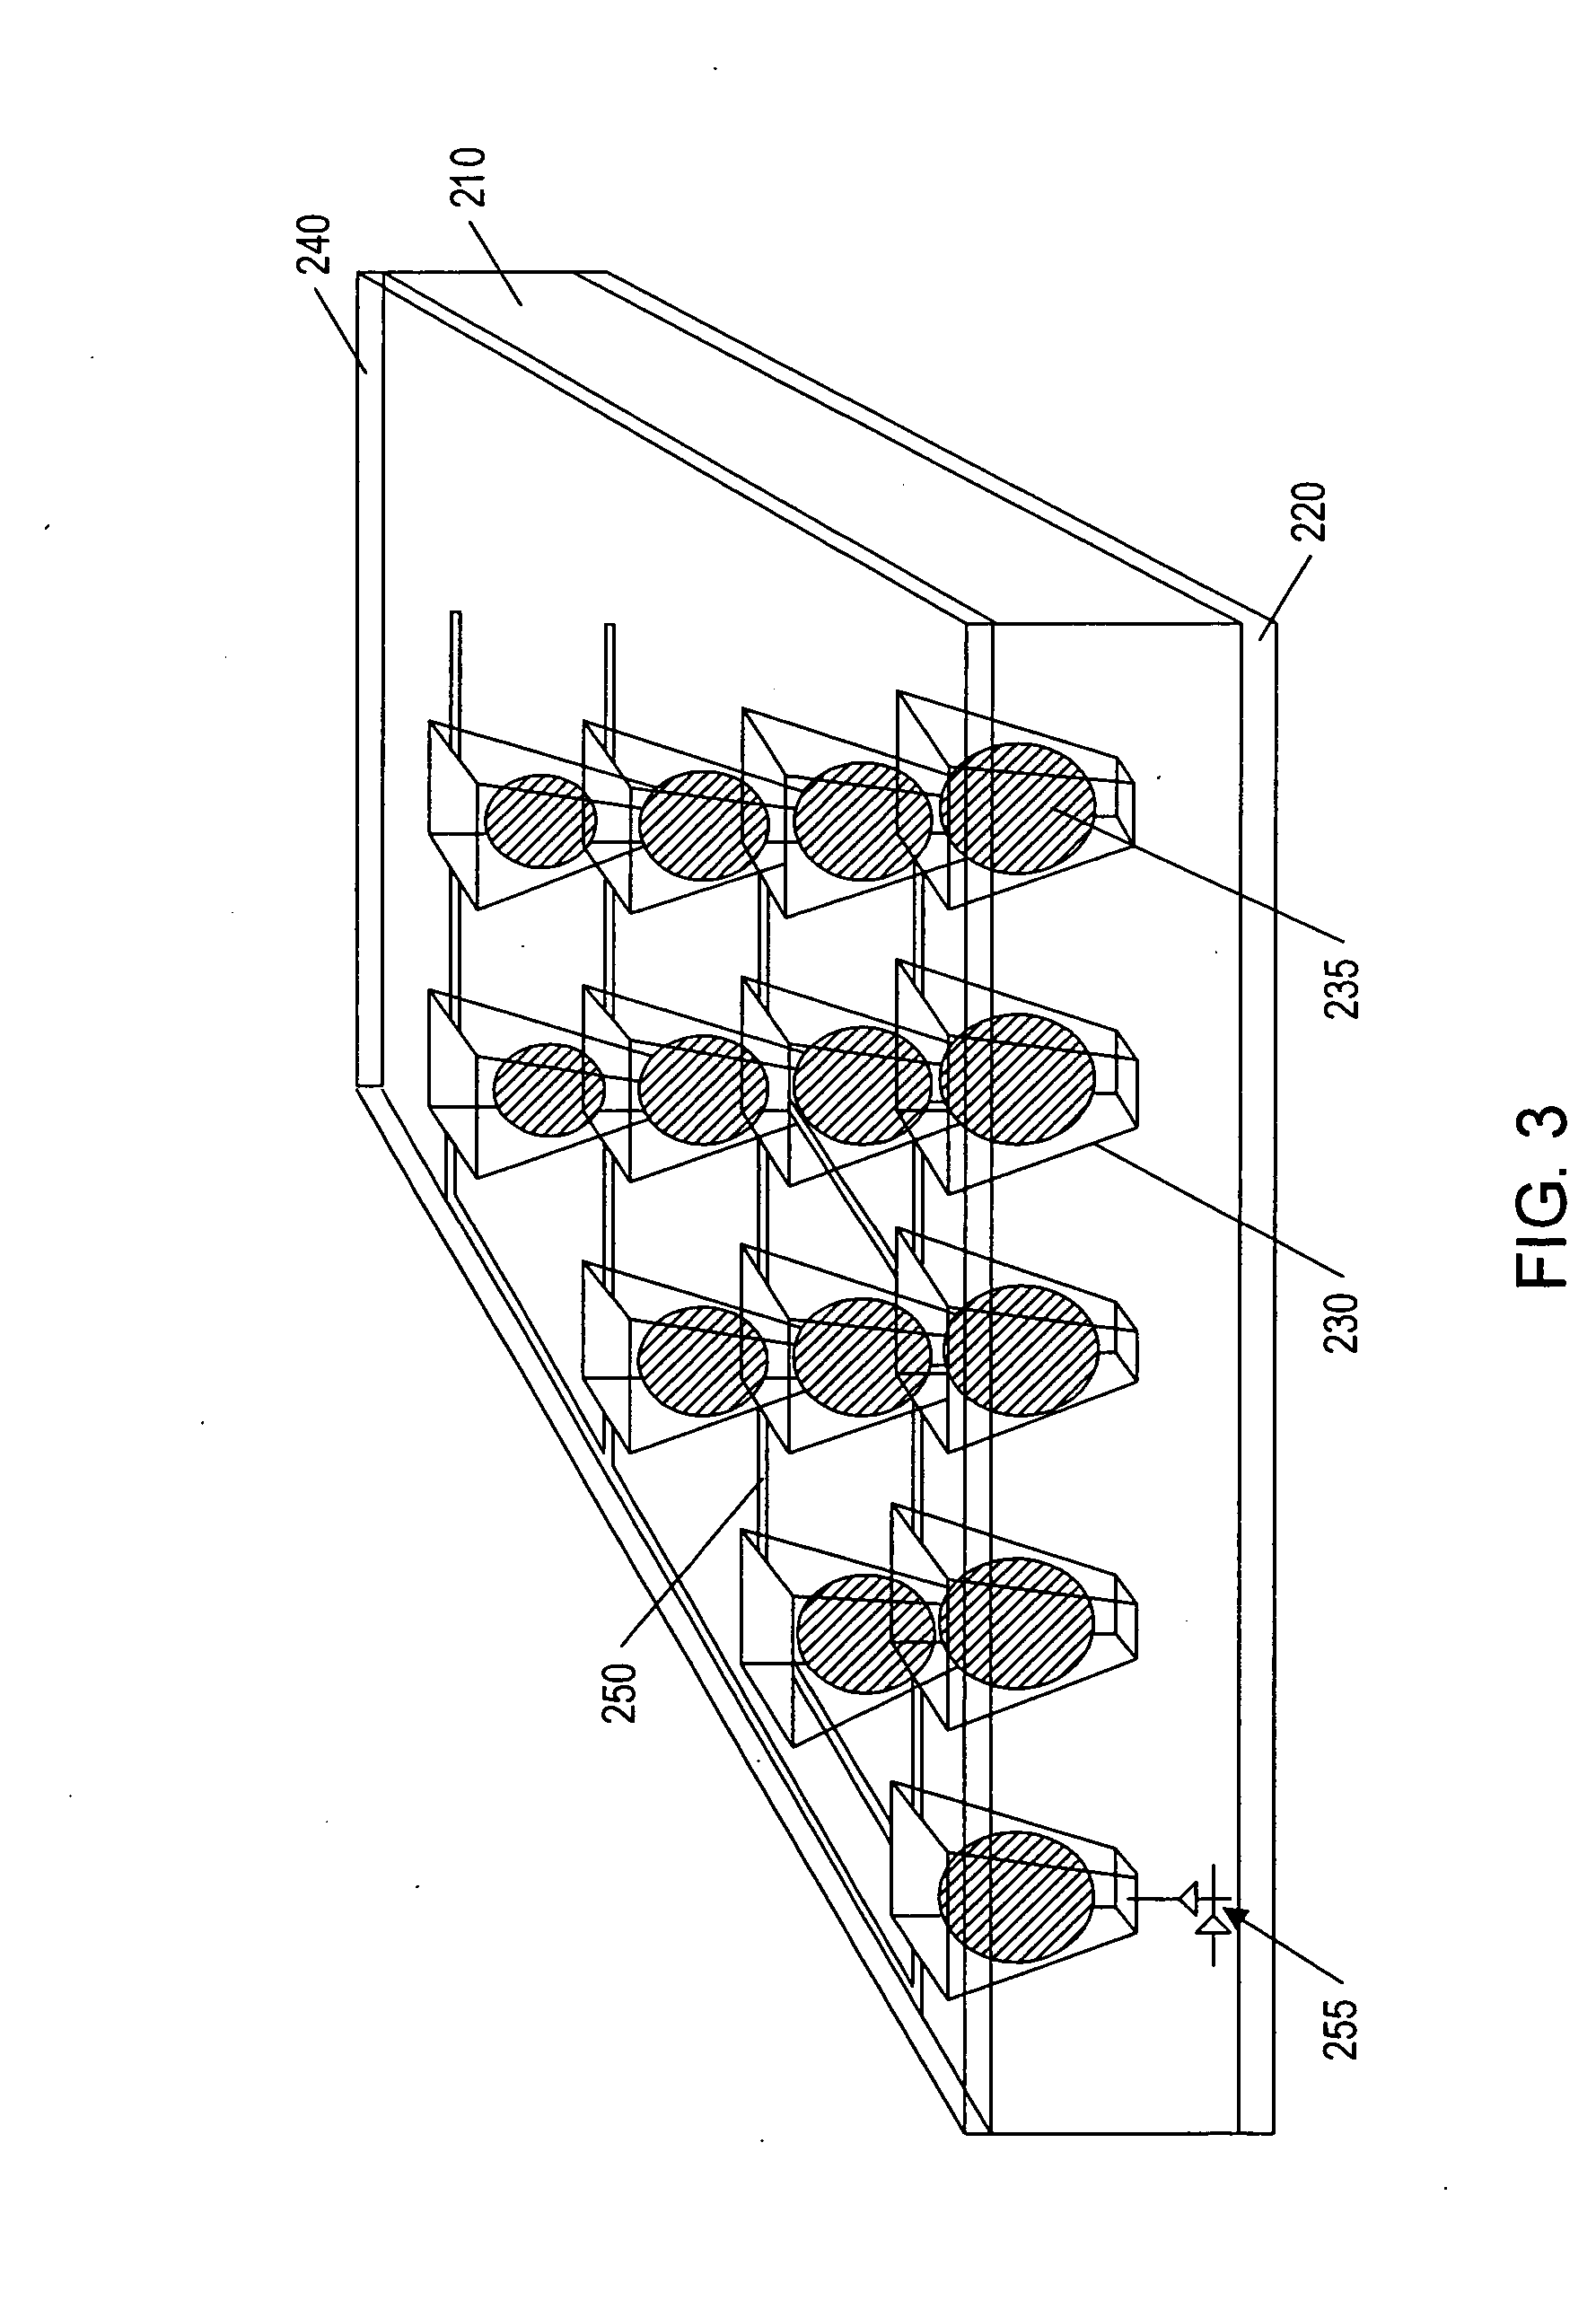 Fluid based analysis of multiple analytes by a sensor array